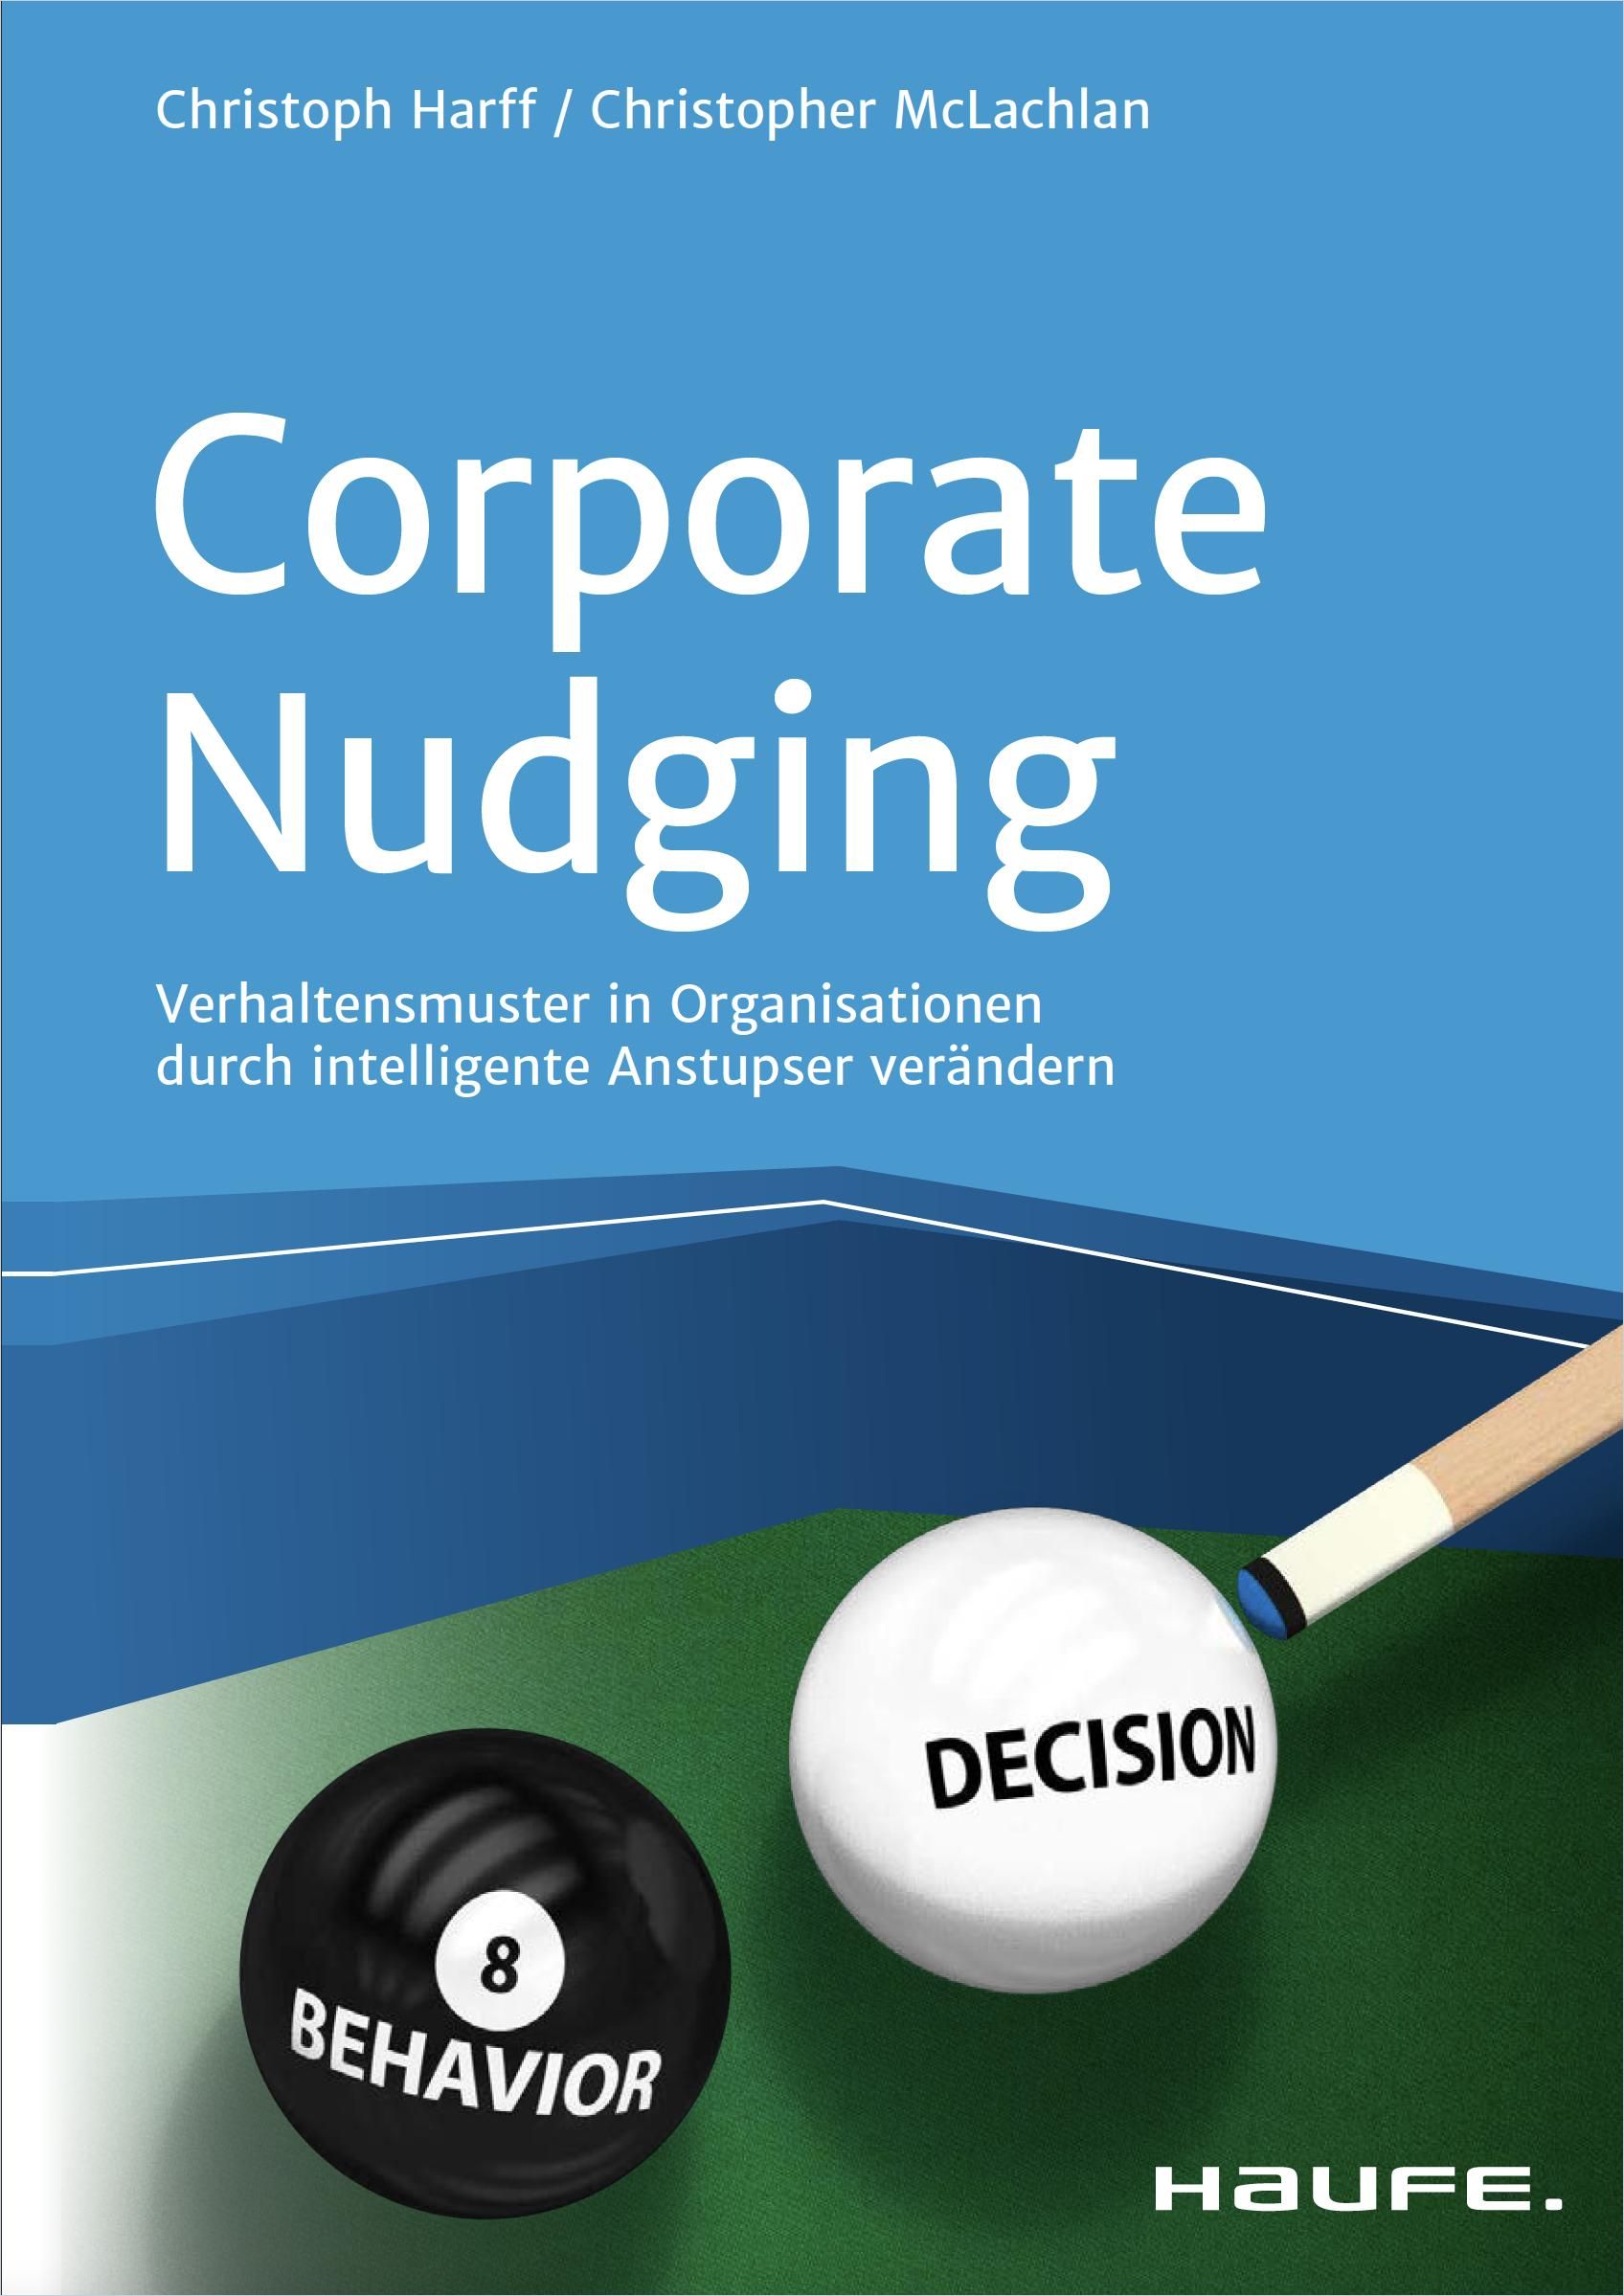 Image of: Corporate Nudging